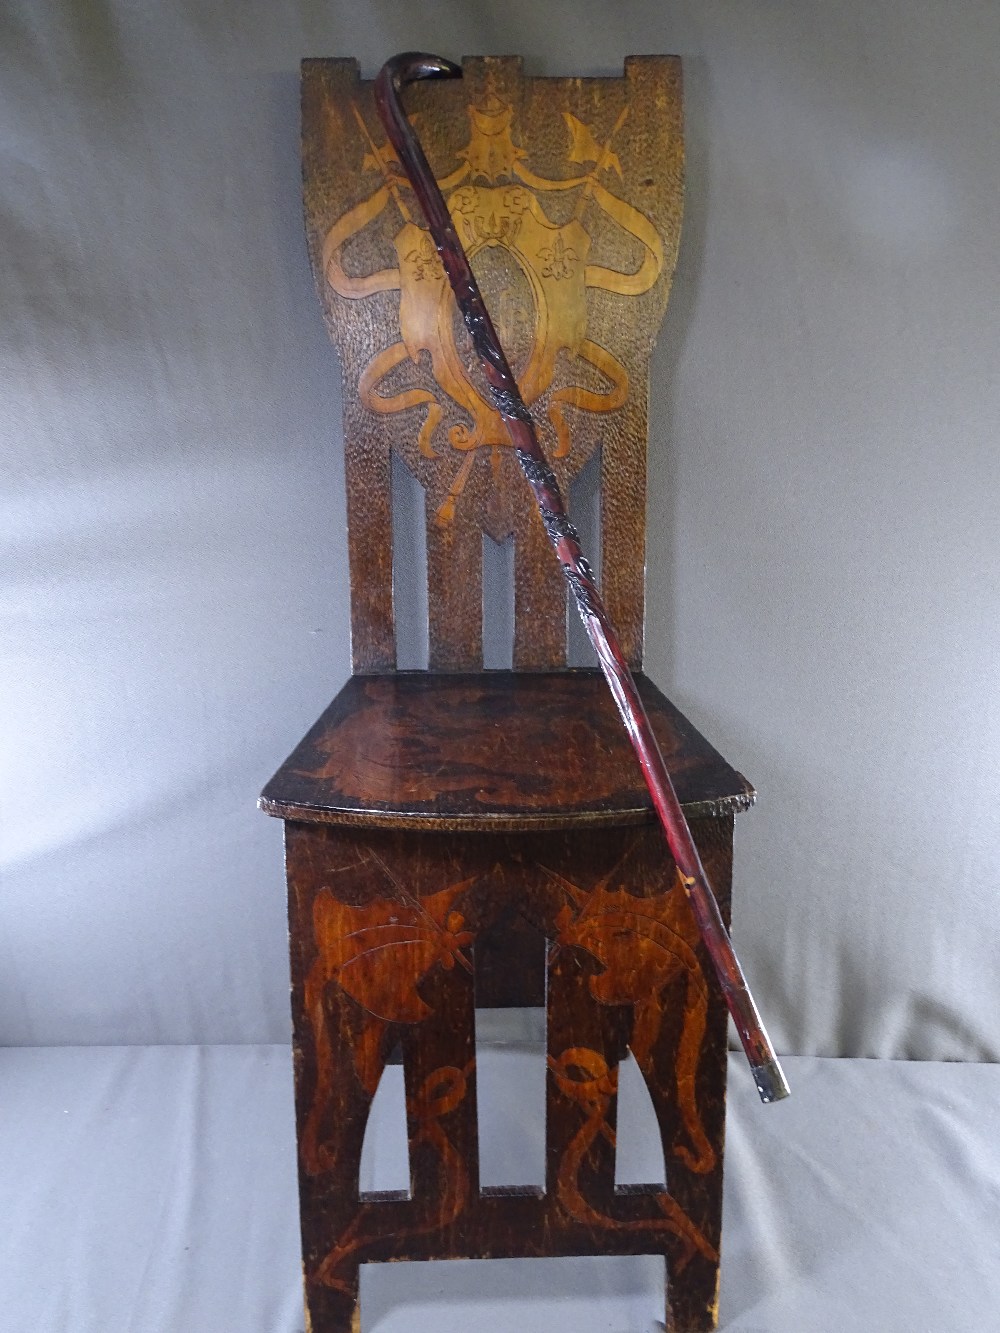 EISTEDDFOD POKERWORK CHAIR and a walking stick with raised carving